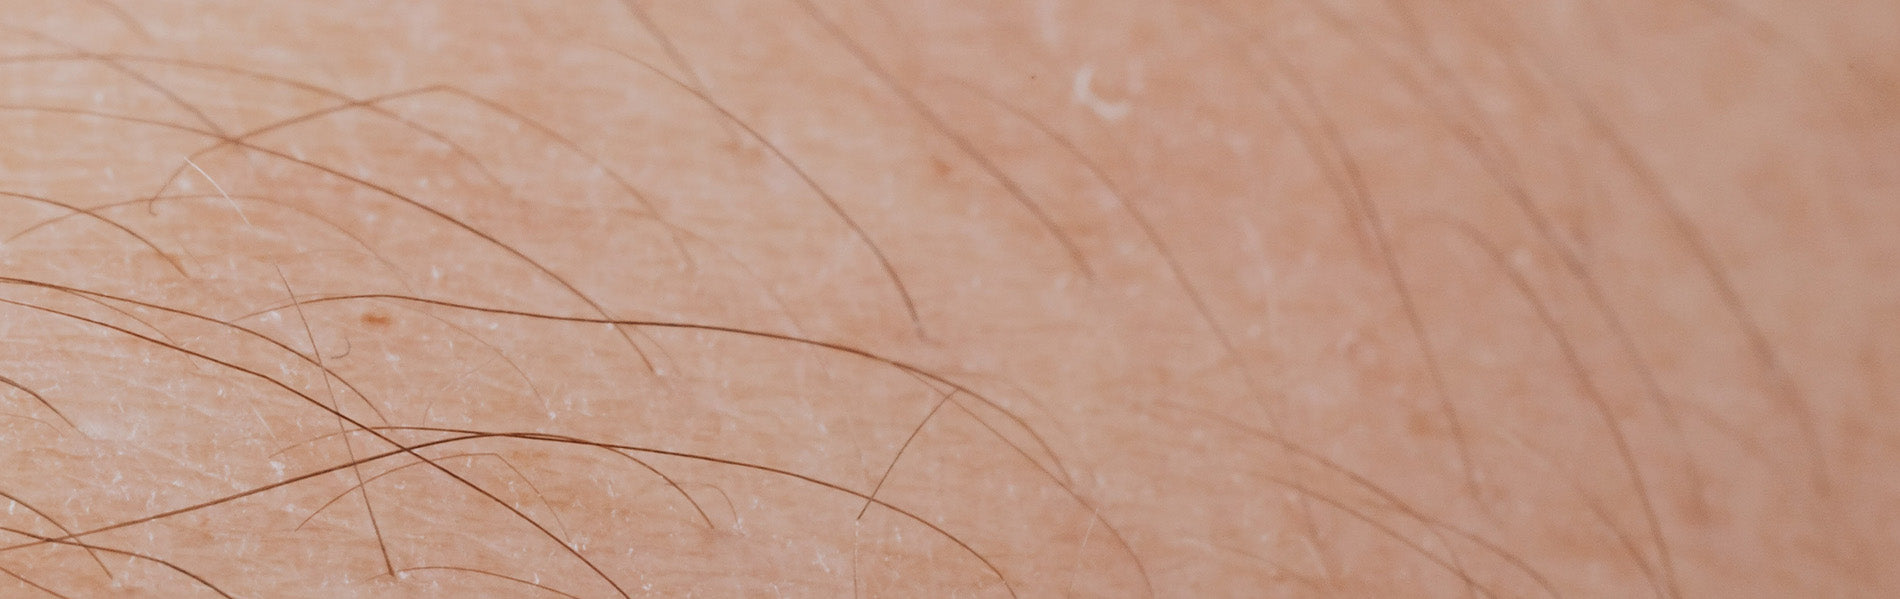 Is IPL hair removal safe?